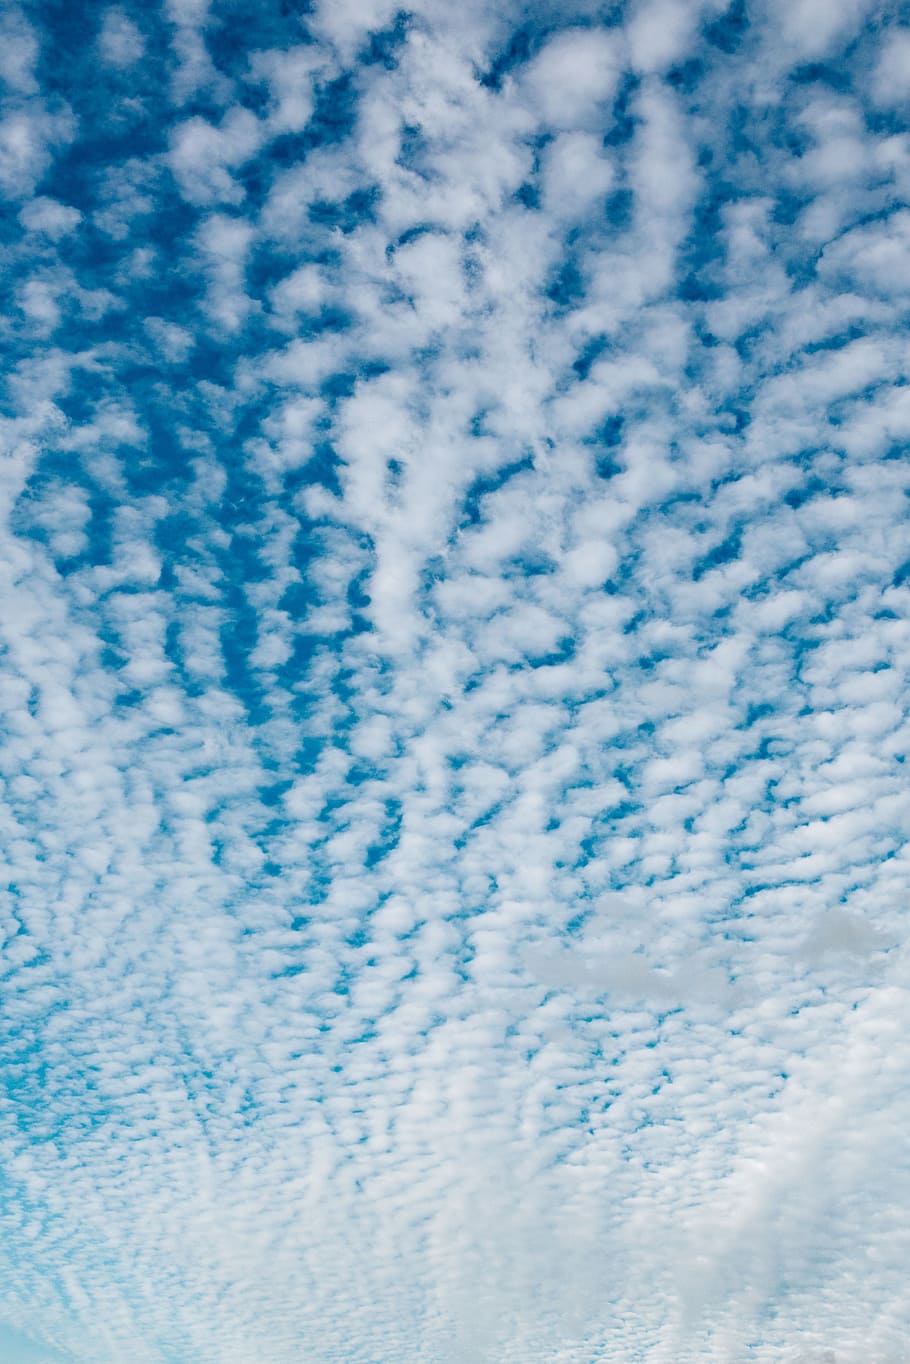 vast, blue, sky, clouds sky, day, abstract, blue sky, clouds, cloud, fluffy